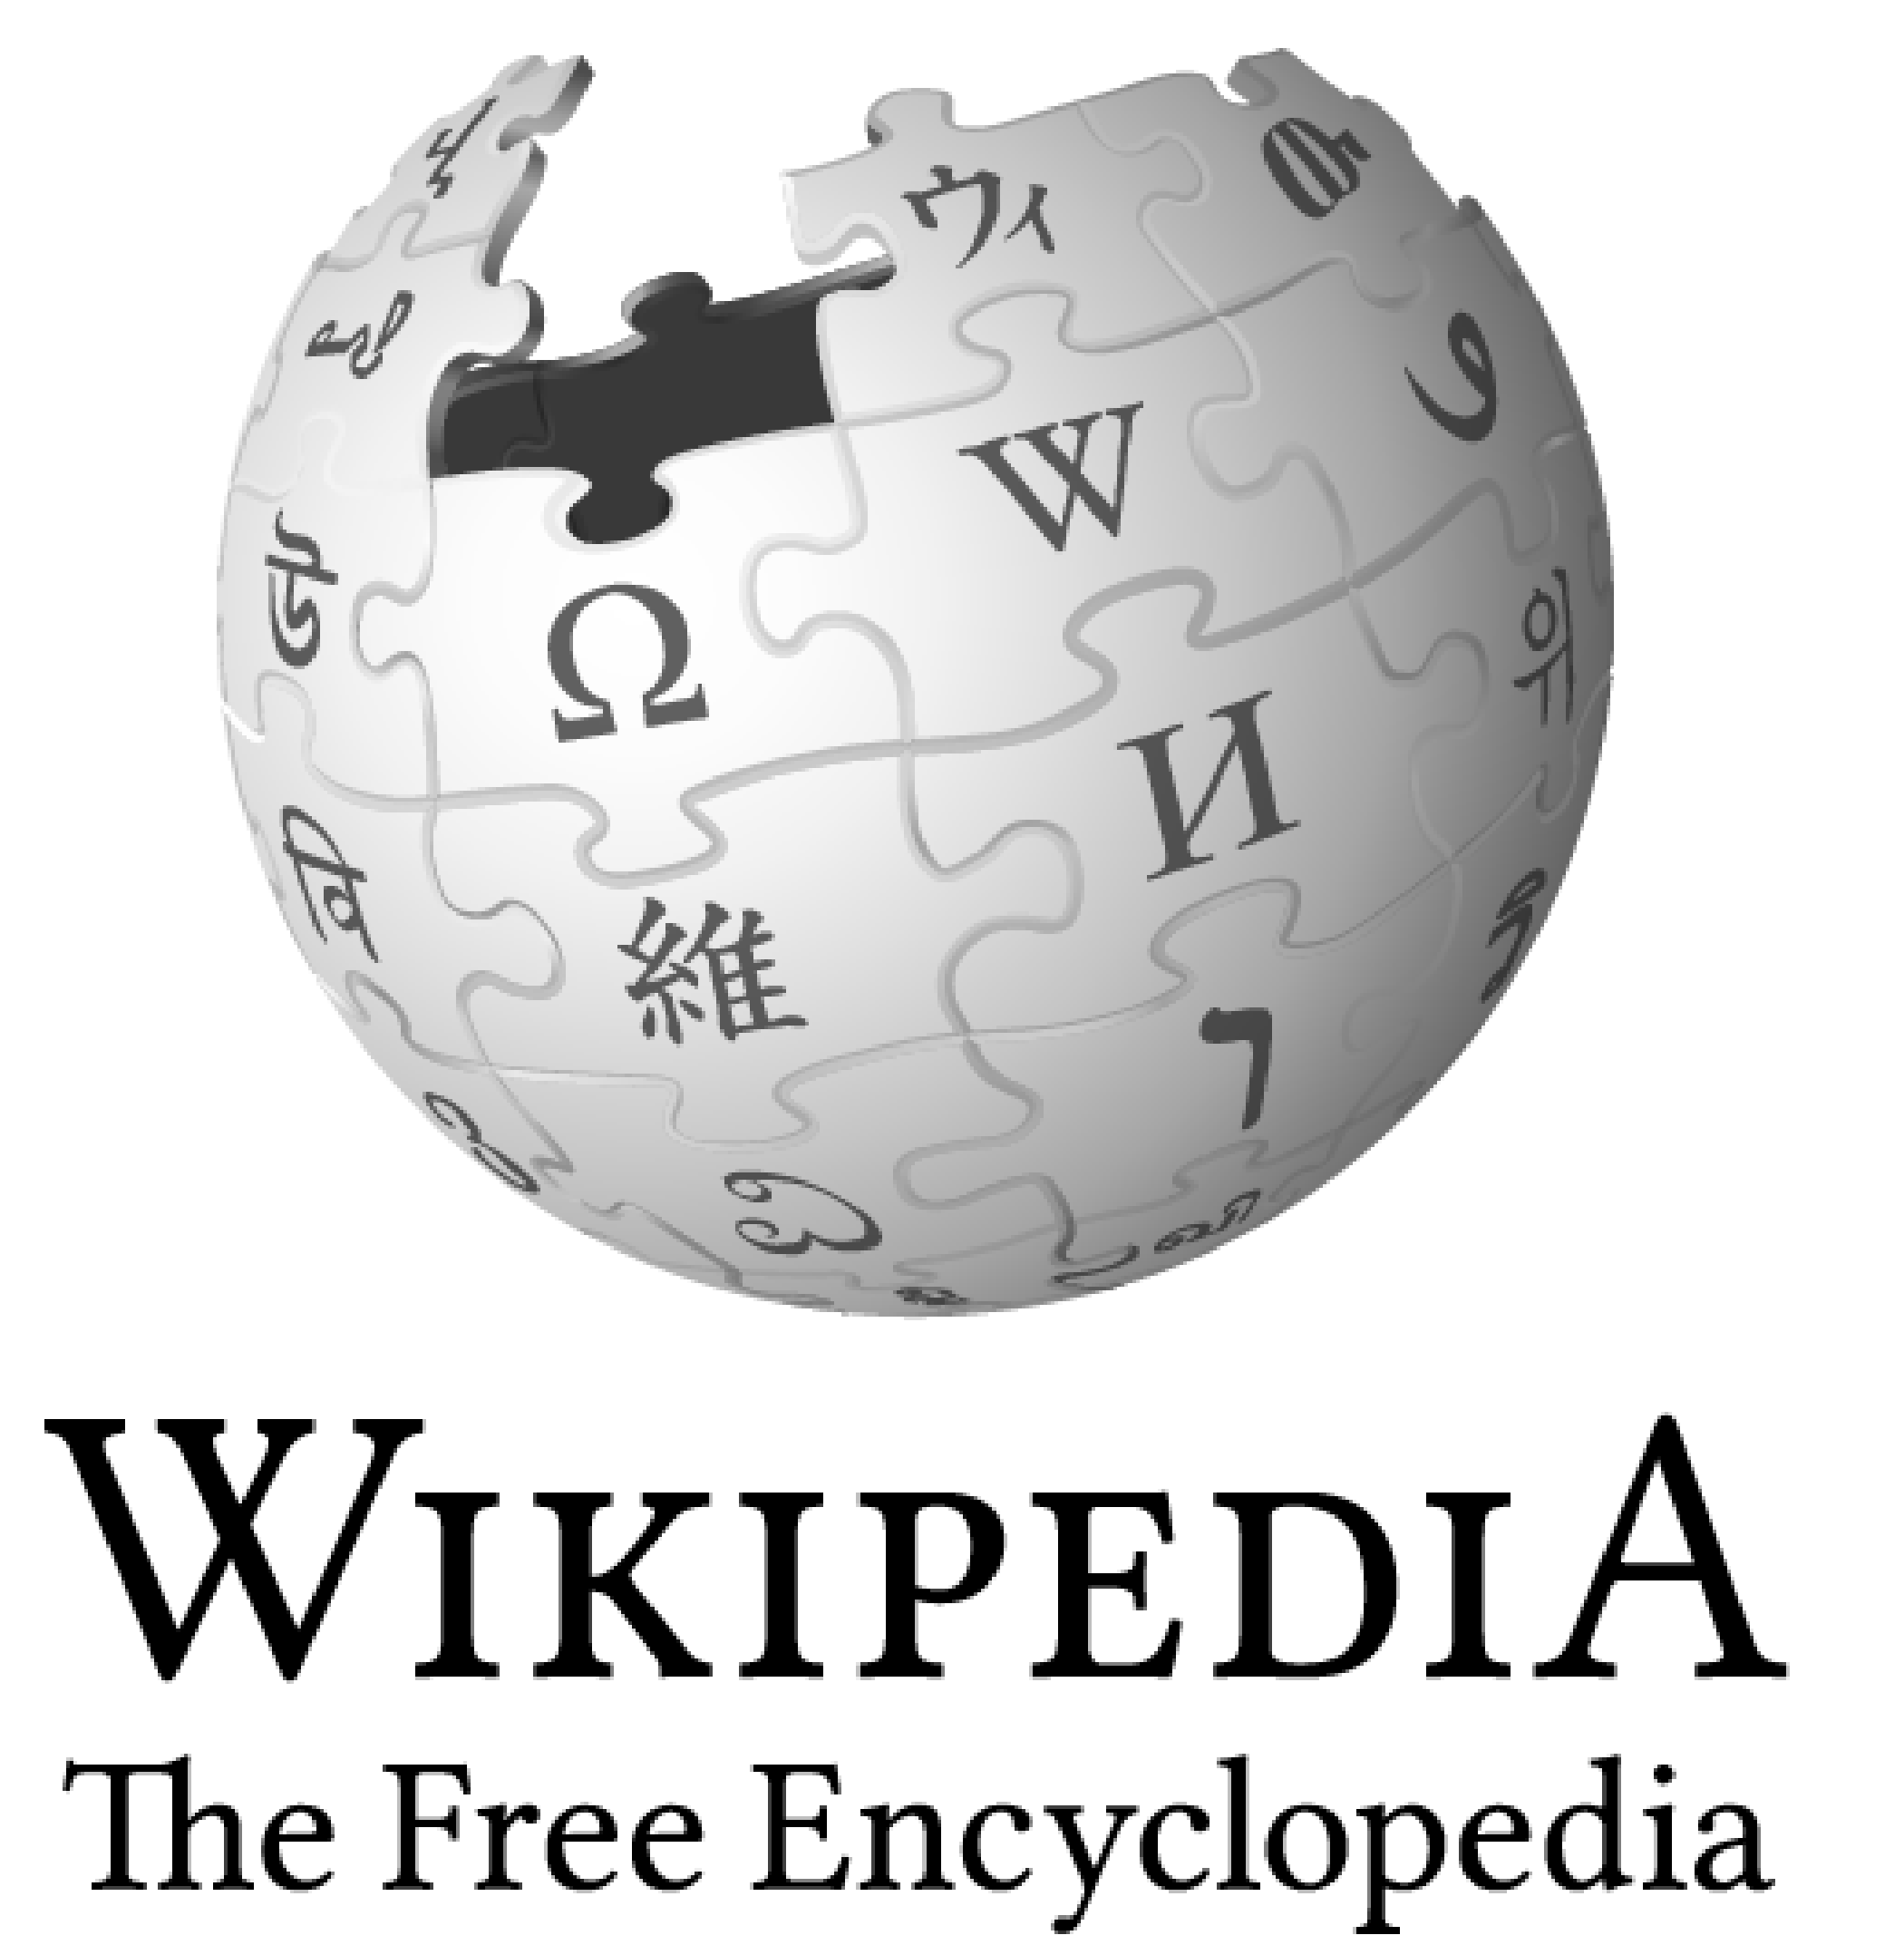 Wikipedia goes dark across europe, Middle East after DDOS attack